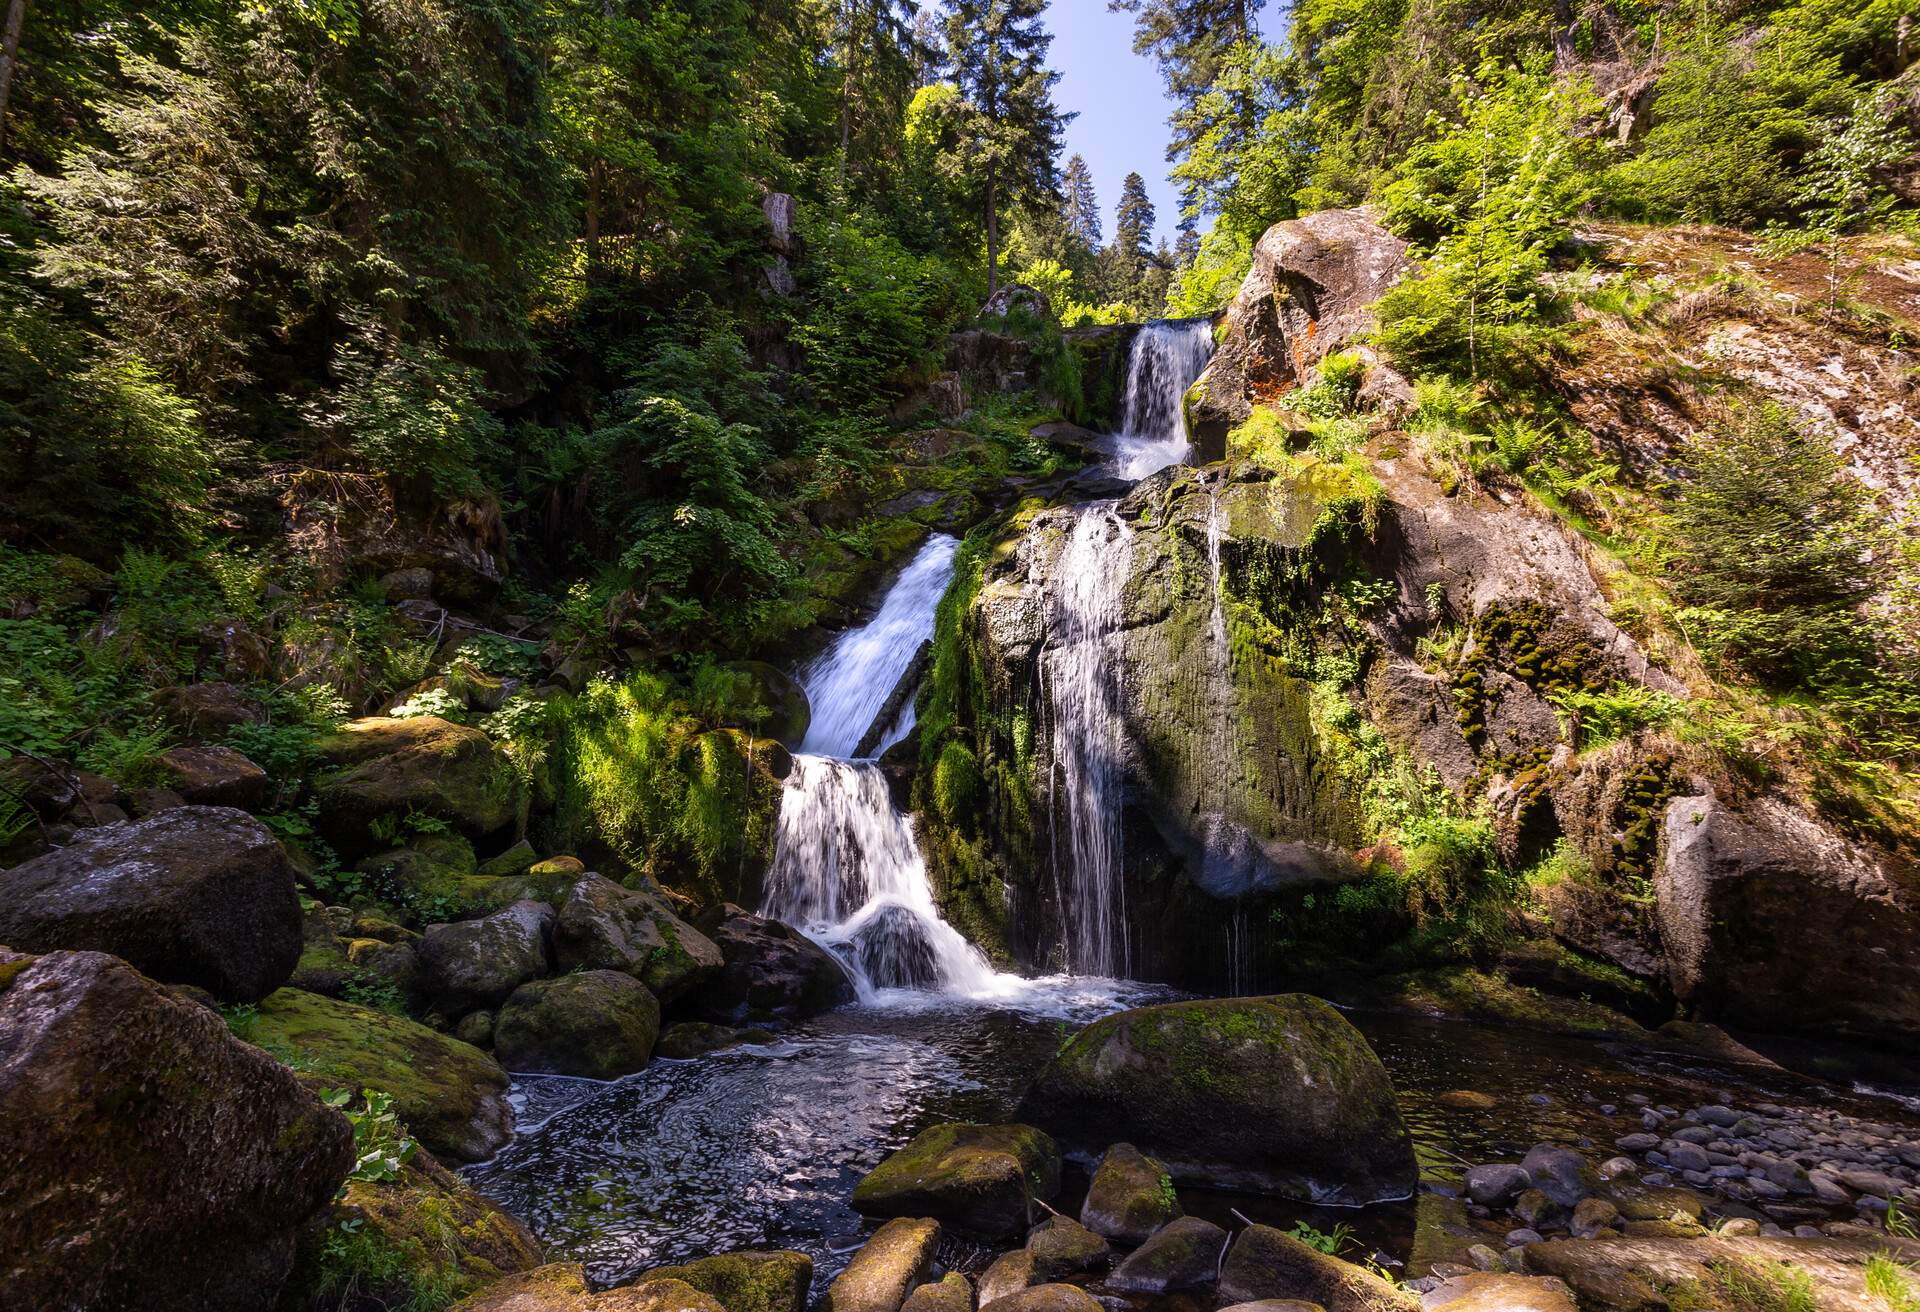 DEST_GERMANY_TRIBERG_WATERFALL_GettyImages-1318161219